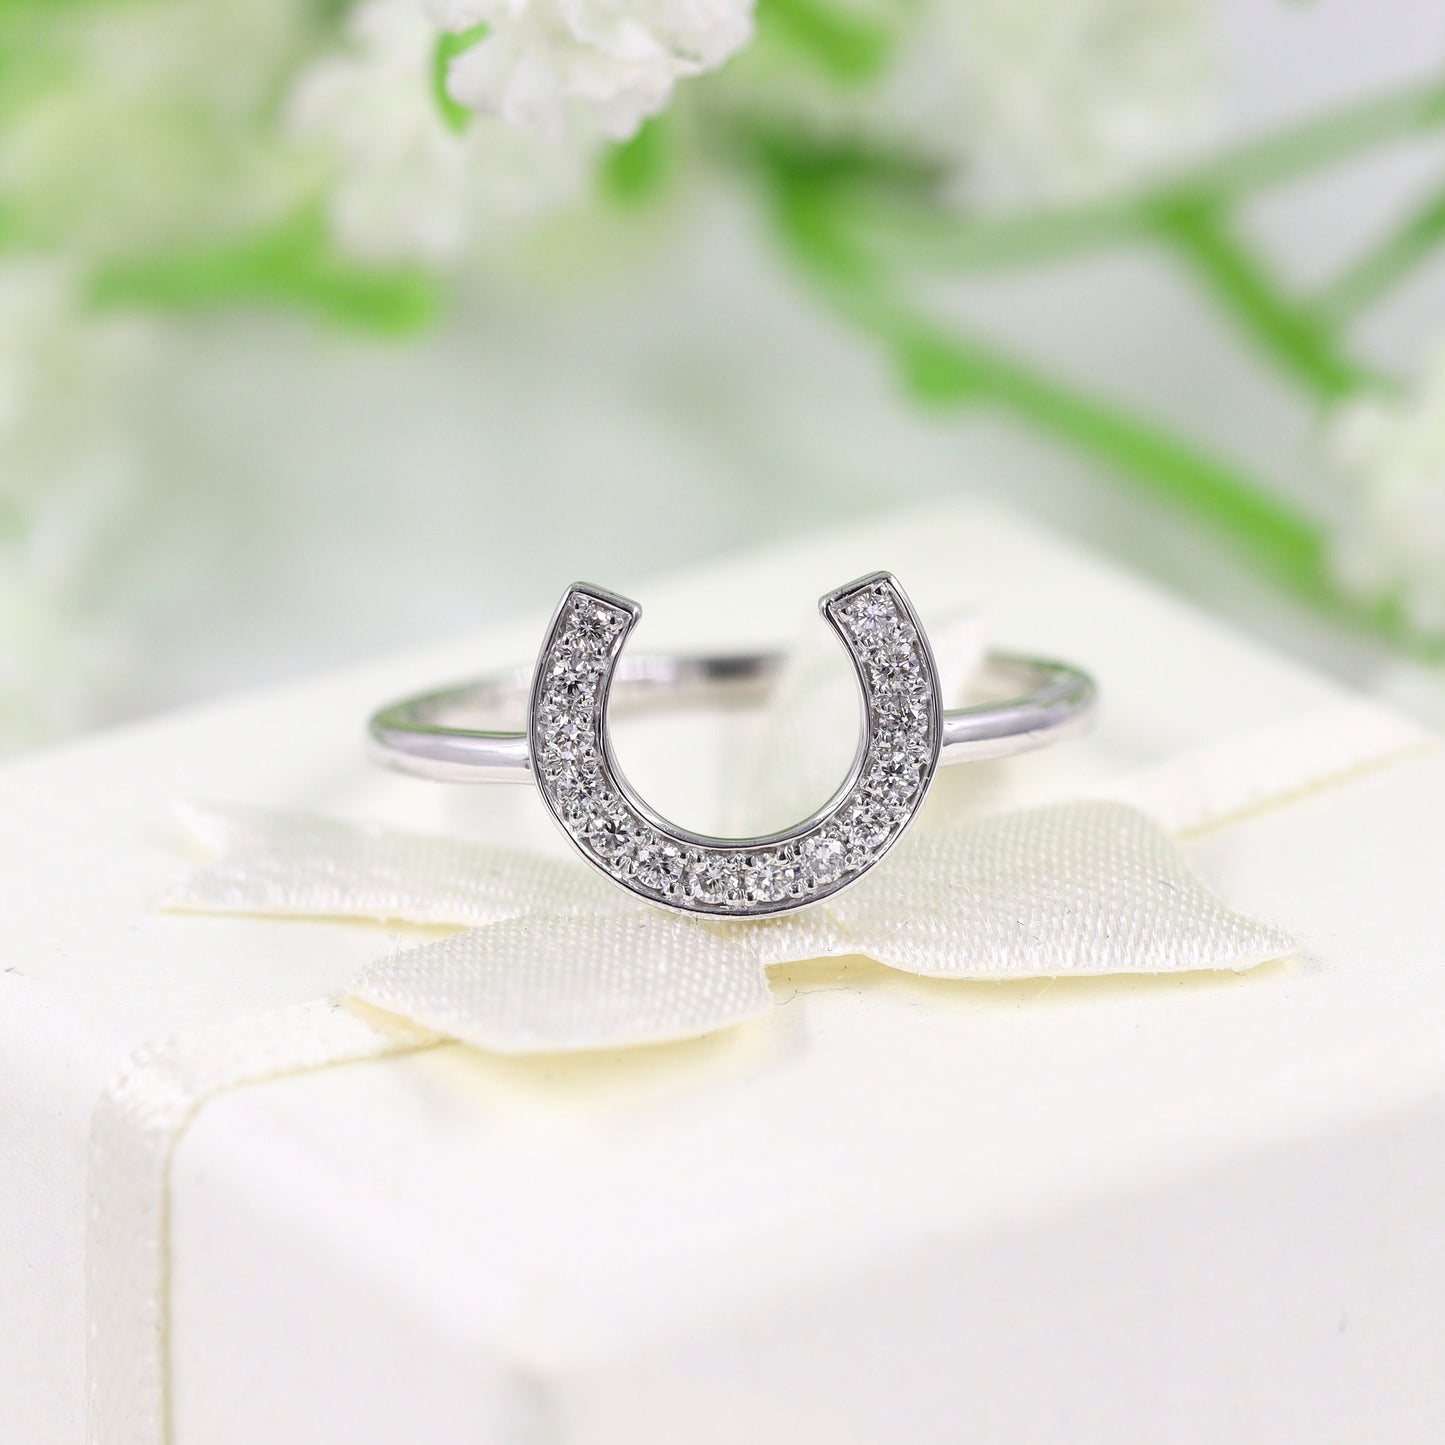 Horse shoe Diamond Wedding Band/Unique Band/14K Solid Gold Natural Diamond Horse shoe Ring/Gift for Her/Anniversary Gift